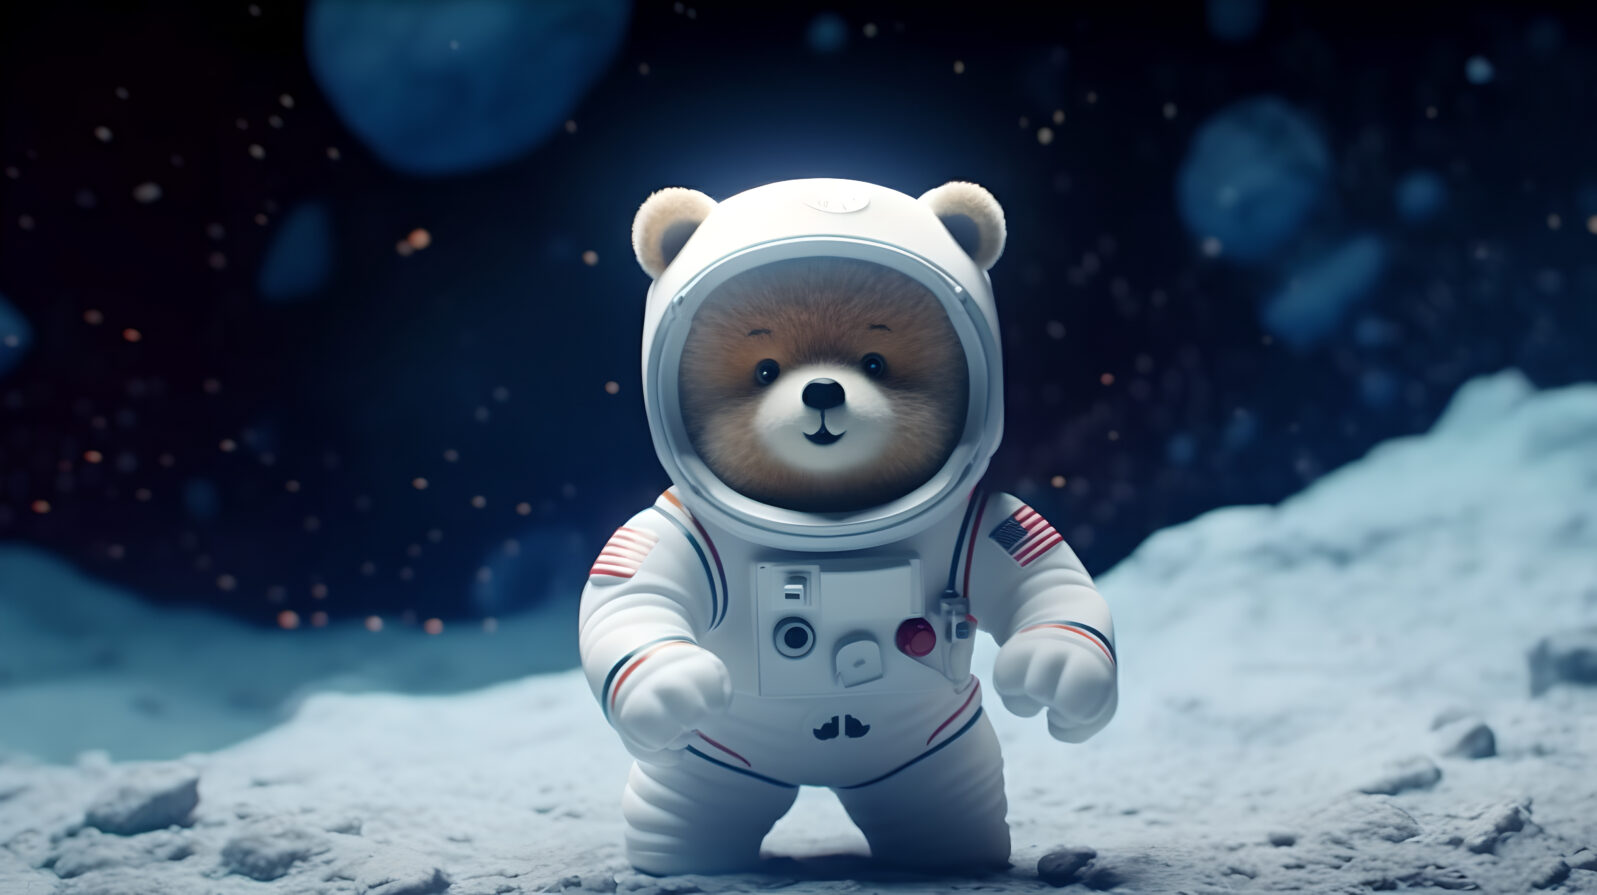 Teddy bear astronaut wearing a tiny space suit floating in space and galaxy background outer space. Science fiction wallpaper.